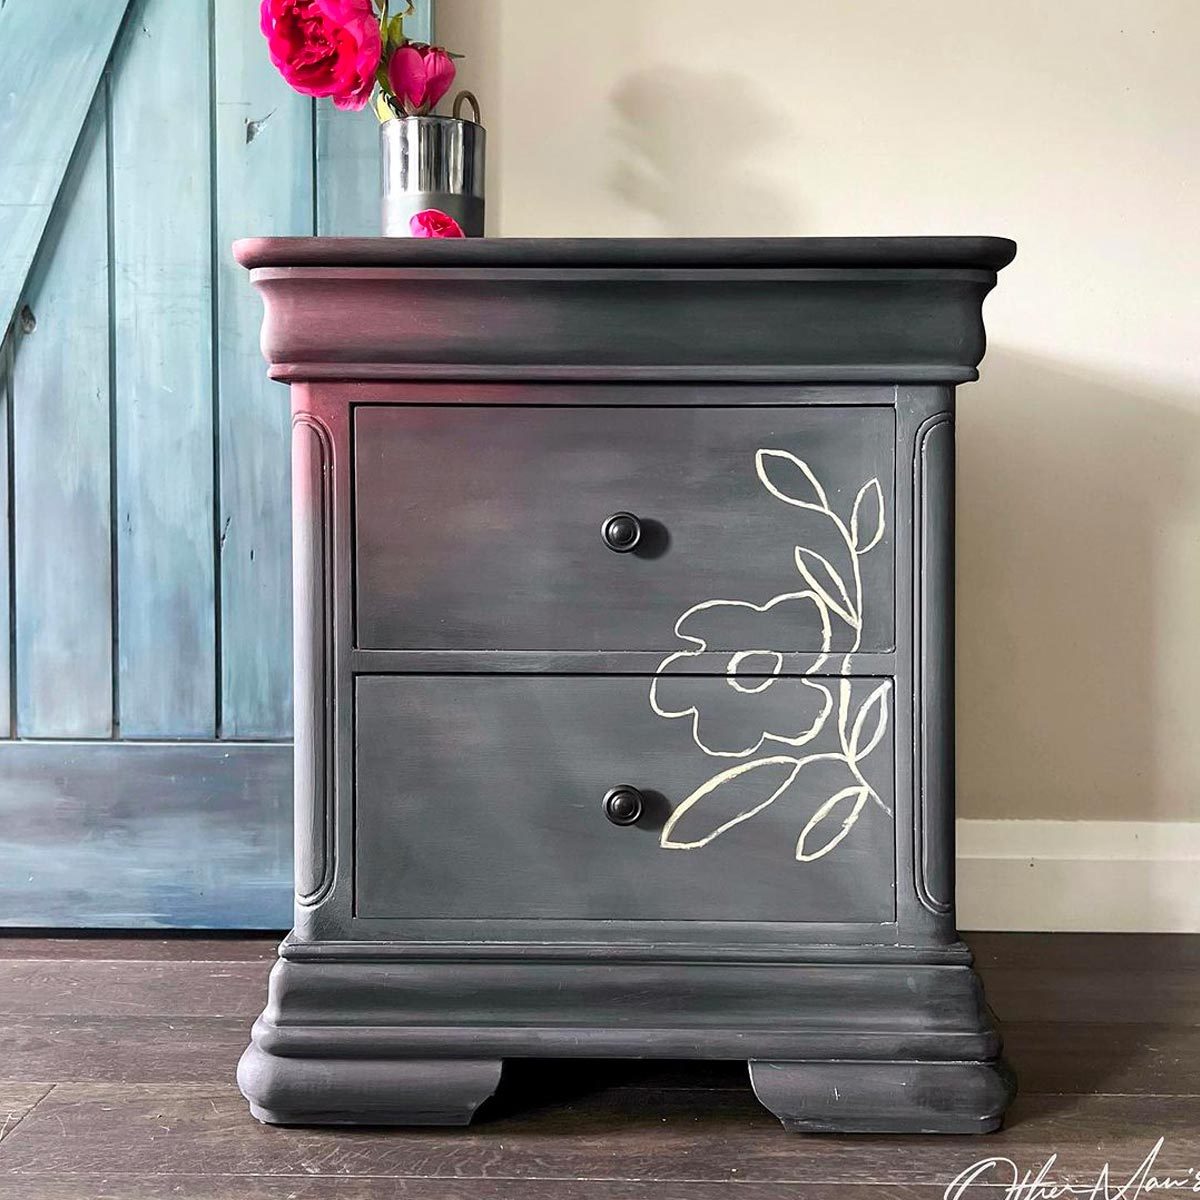  Chalk Style Paint - for Furniture, Home Decor, Crafts